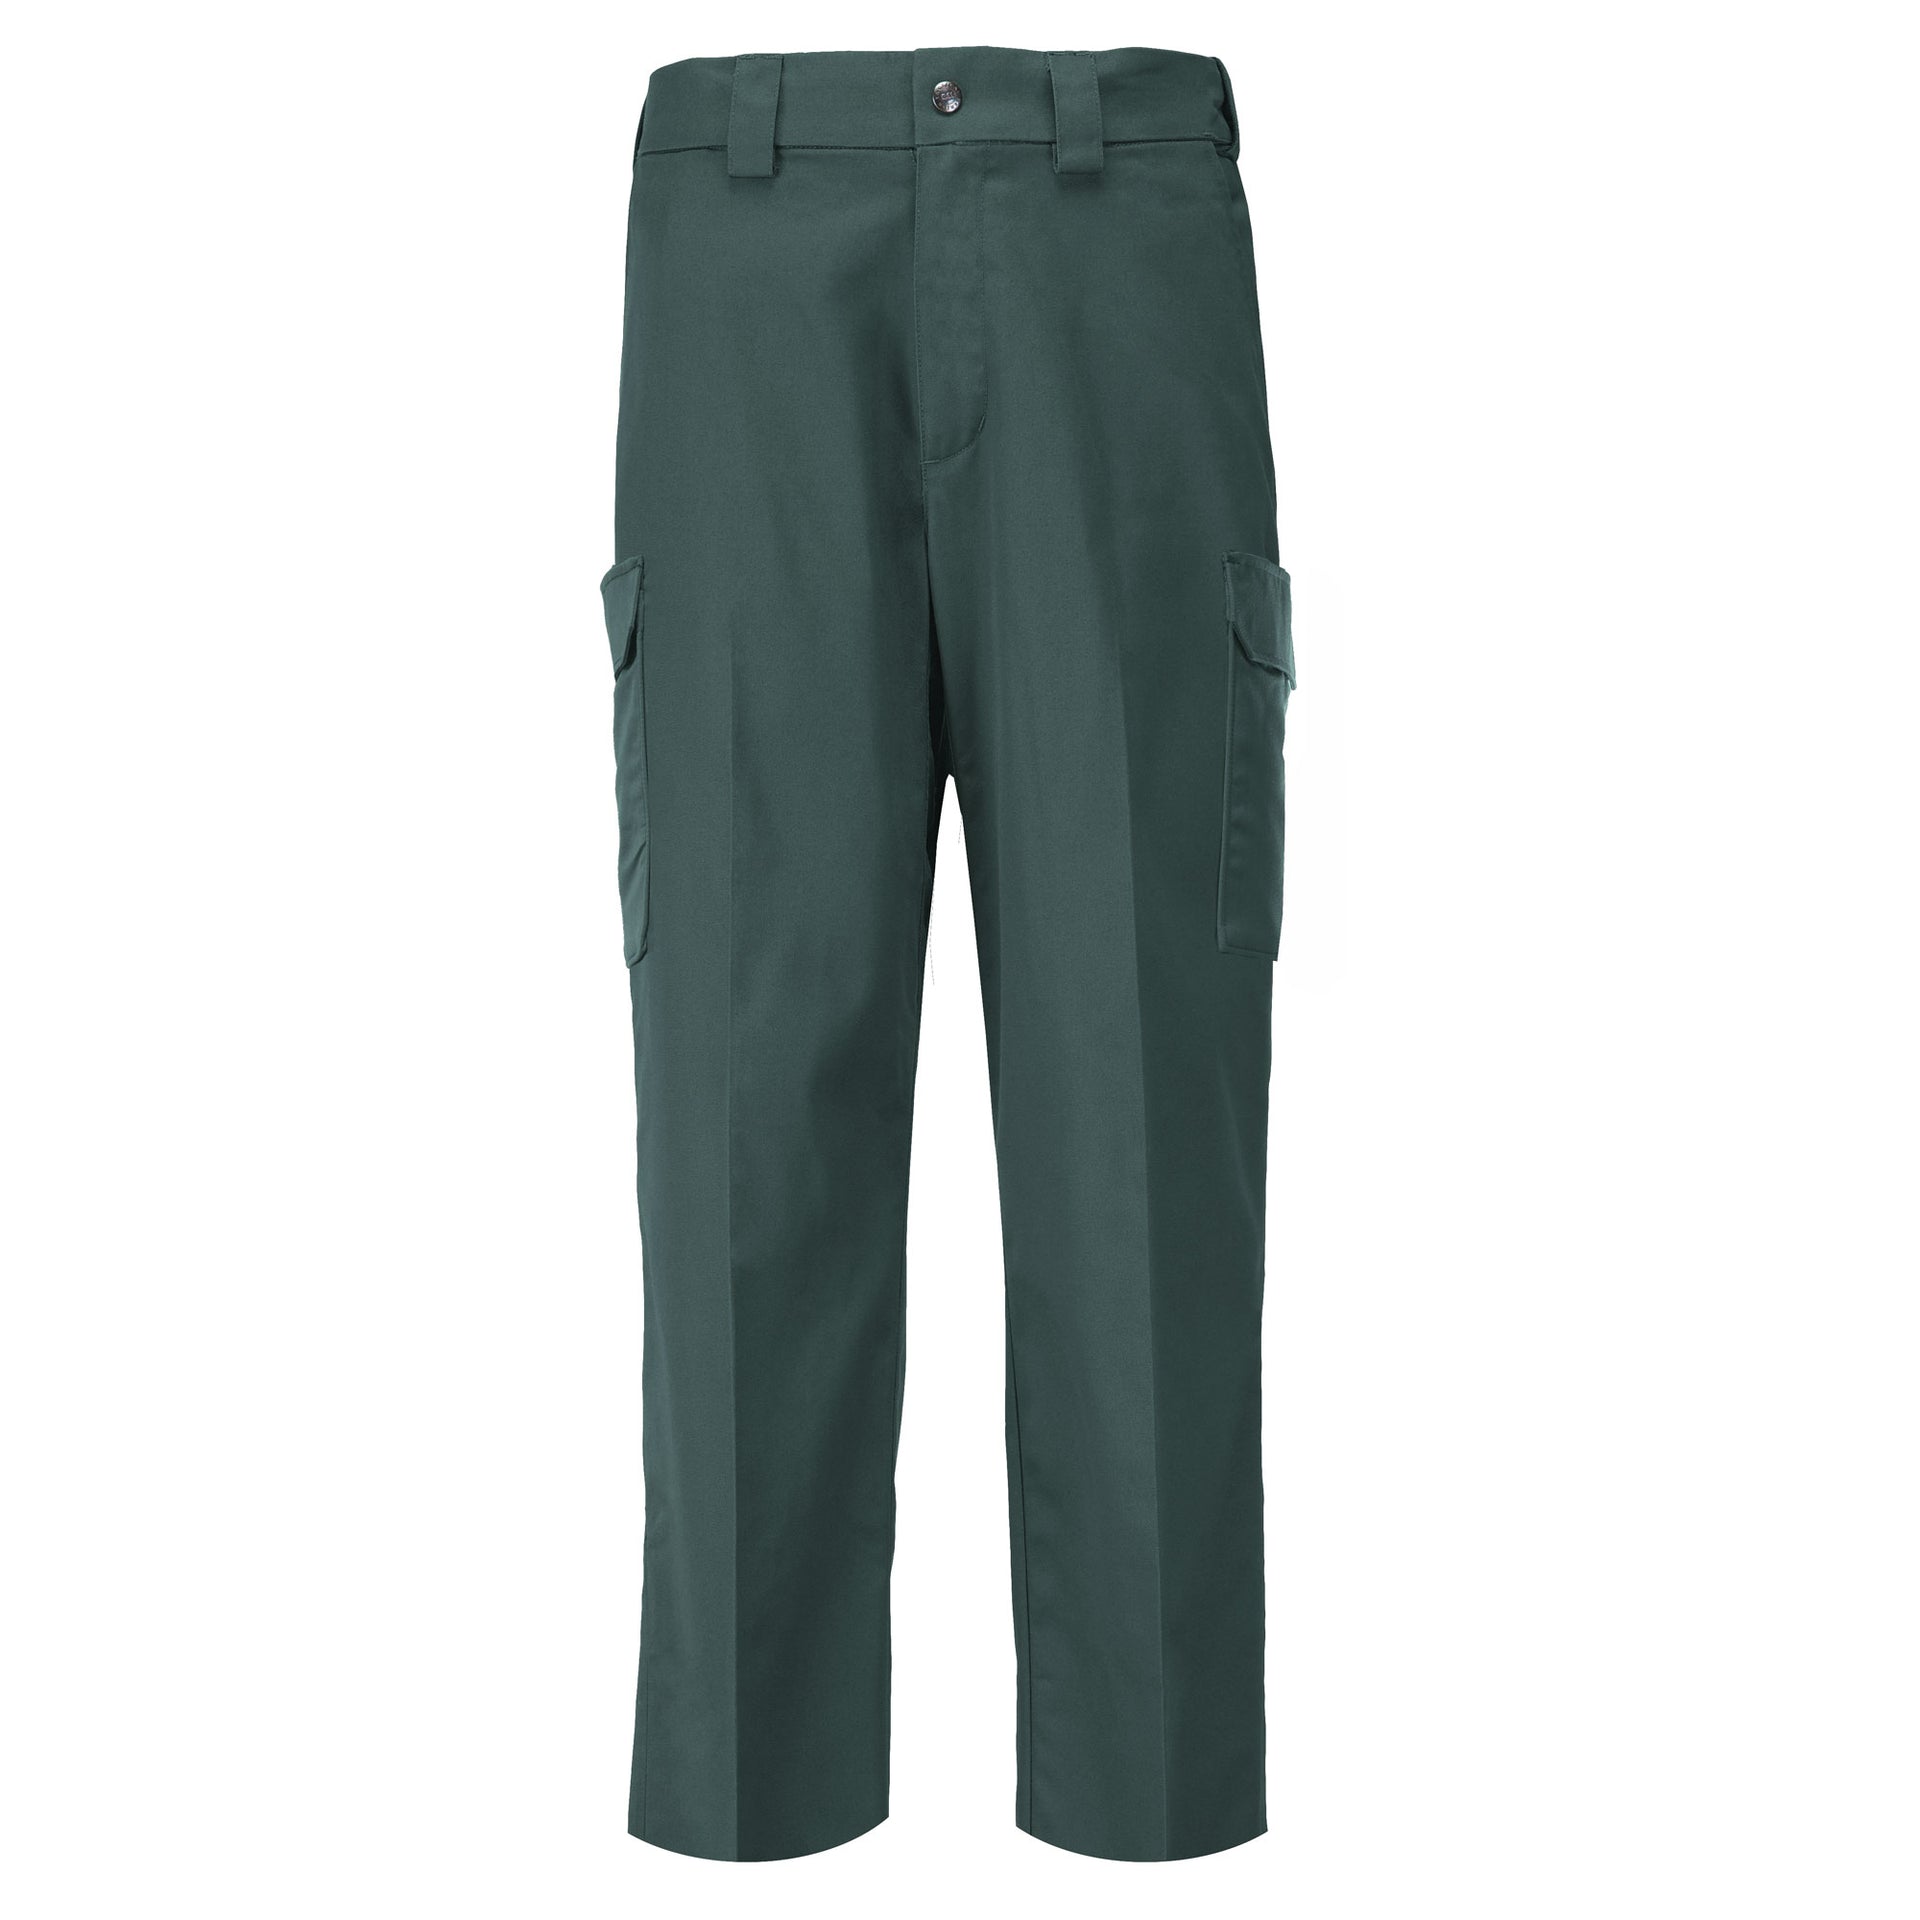 5.11 Tactical TACLITE® PDU® Cargo Class- B Pant (74371) | The Fire Center | Fuego Fire Center |  The TACLITE® PDU® Class-B Cargo Pants are engineered to deliver high performance in harsh, hot-weather patrol environments, and are made from lightweight TACLITE® ripstop fabric, perfect for everyday, all-day wear.